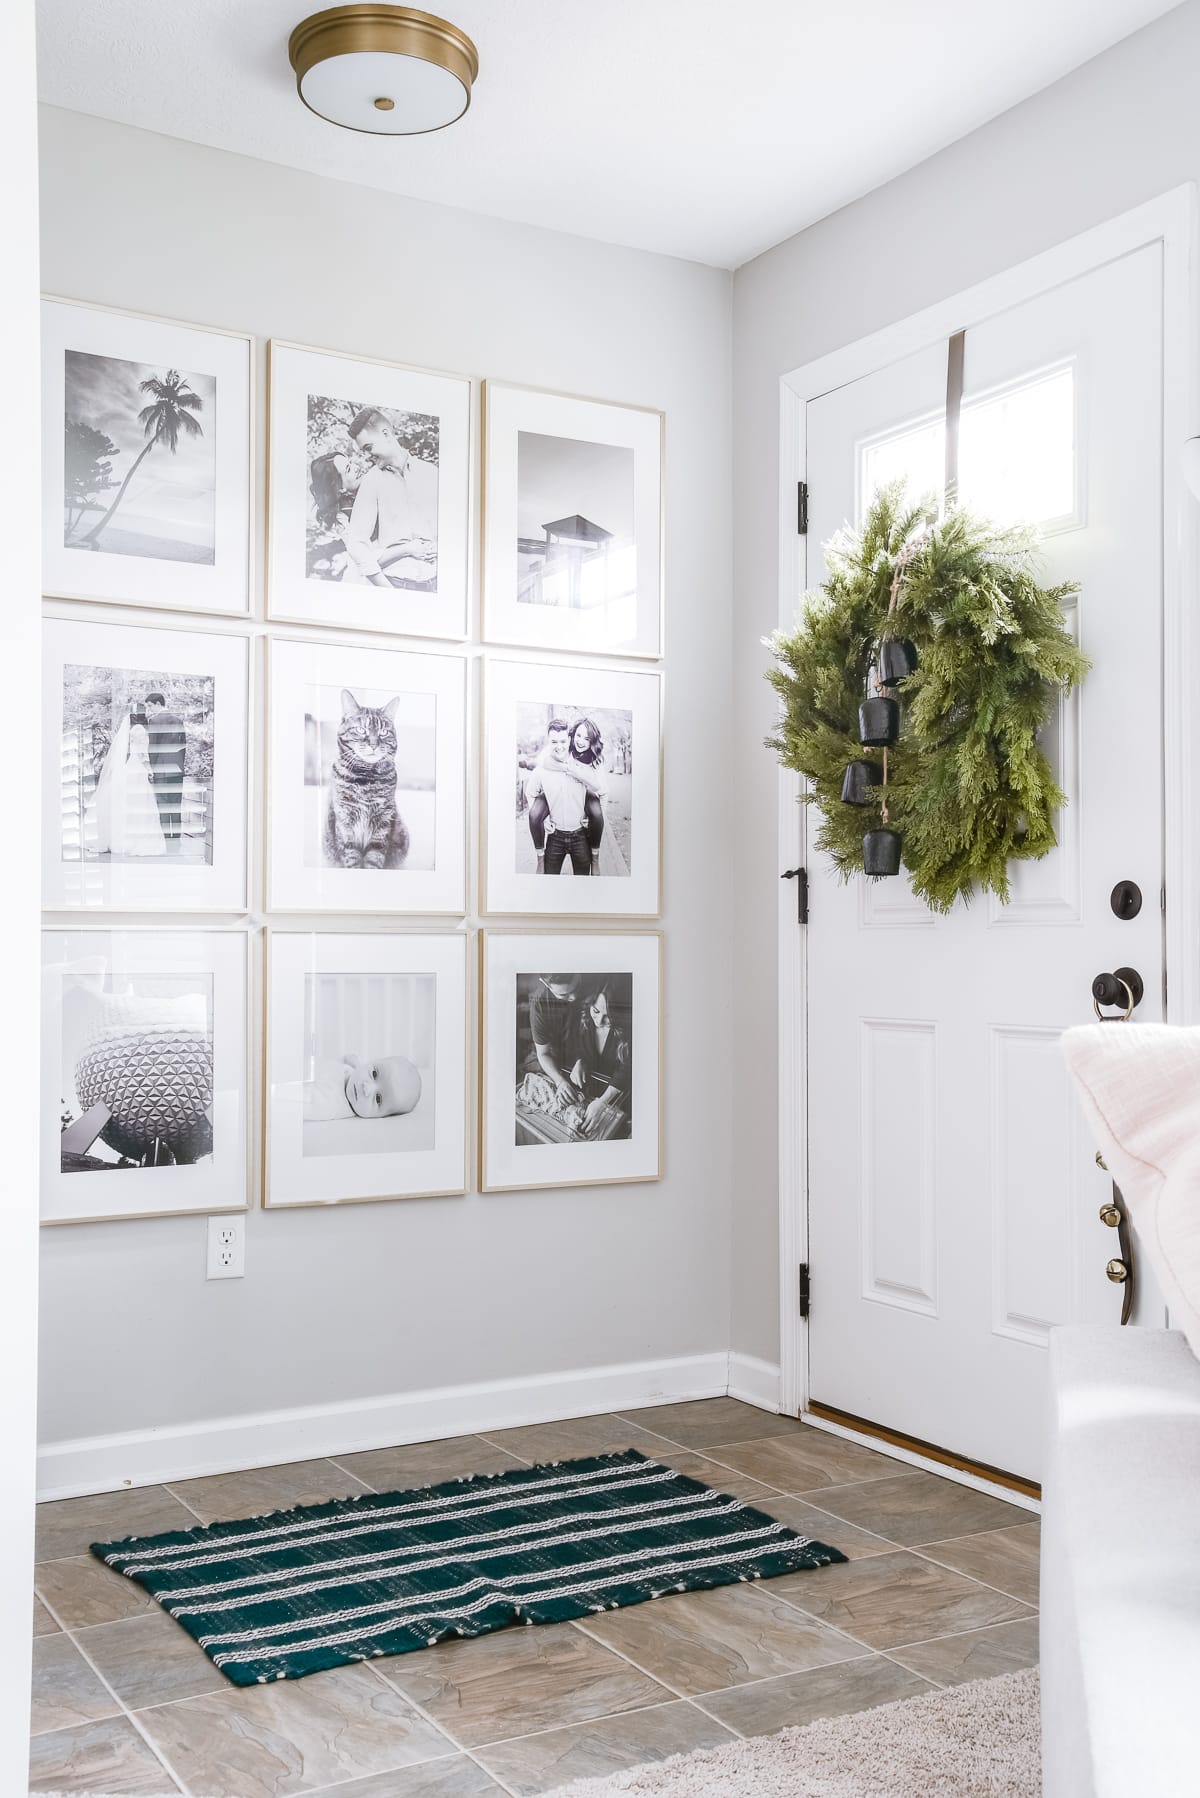 How to Make a DIY Minimalist Gallery Wall: The Best Layout Ideas